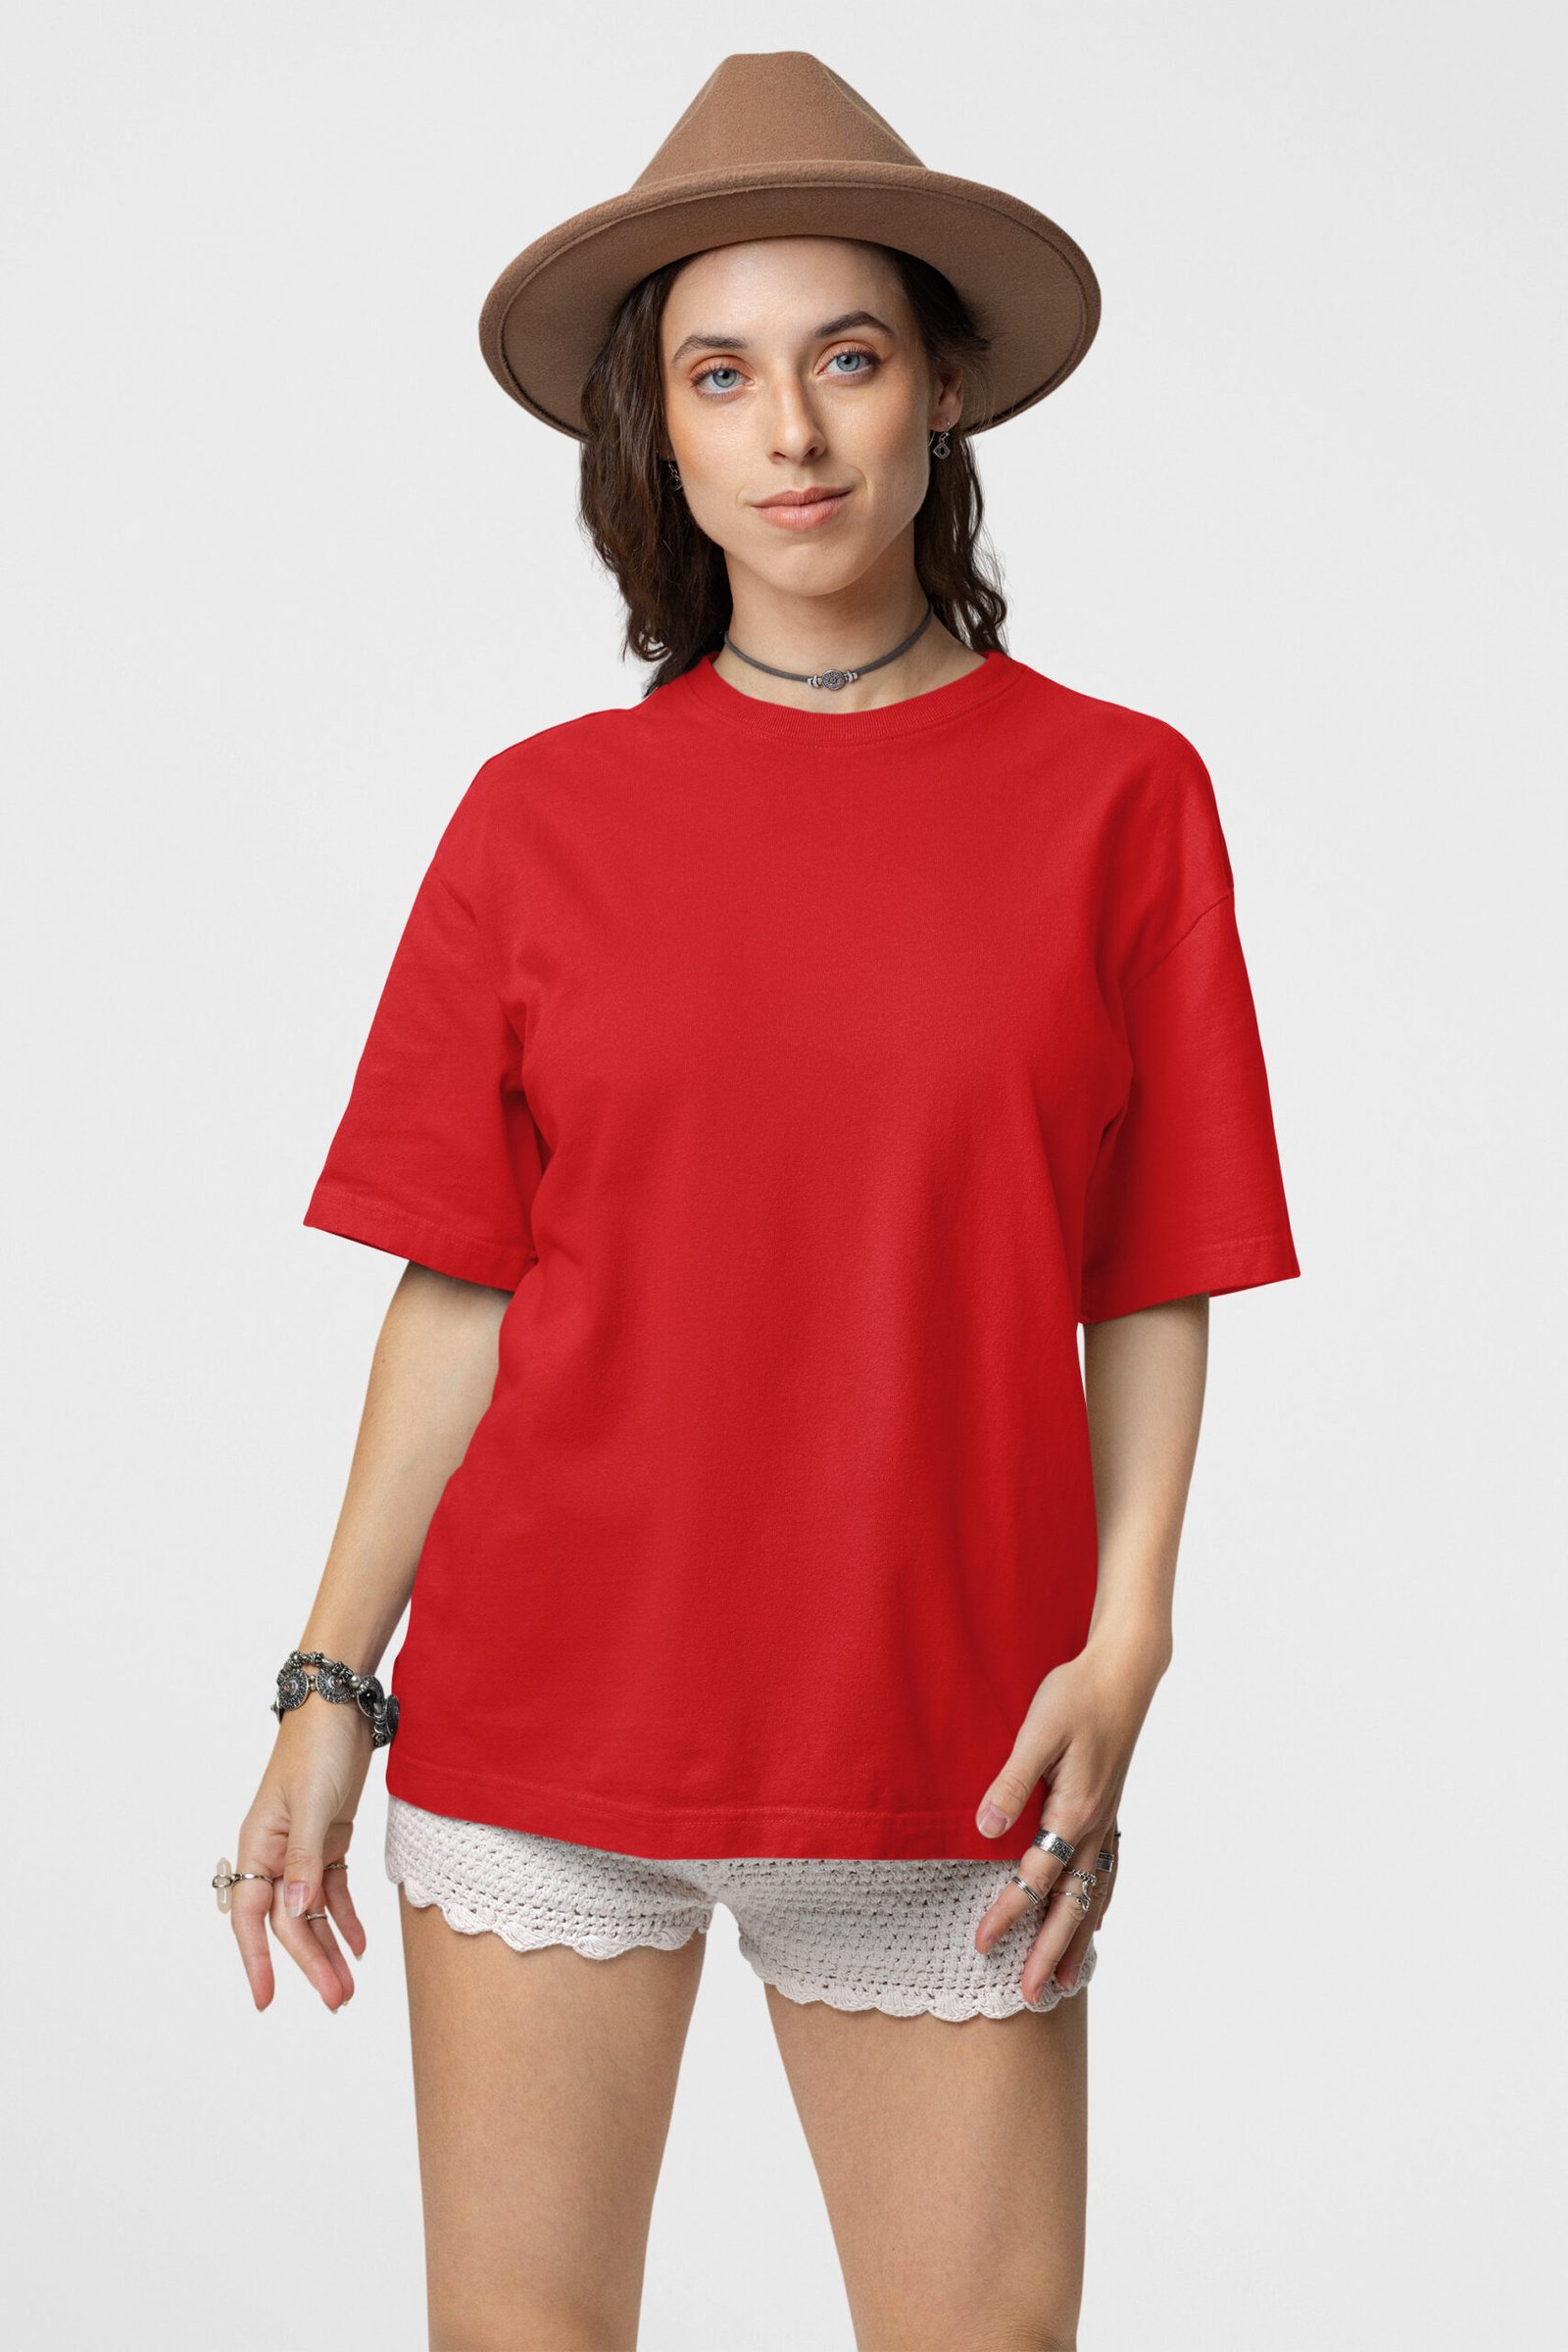 Red Solid T-Shirt by Wayward Wayz - Front